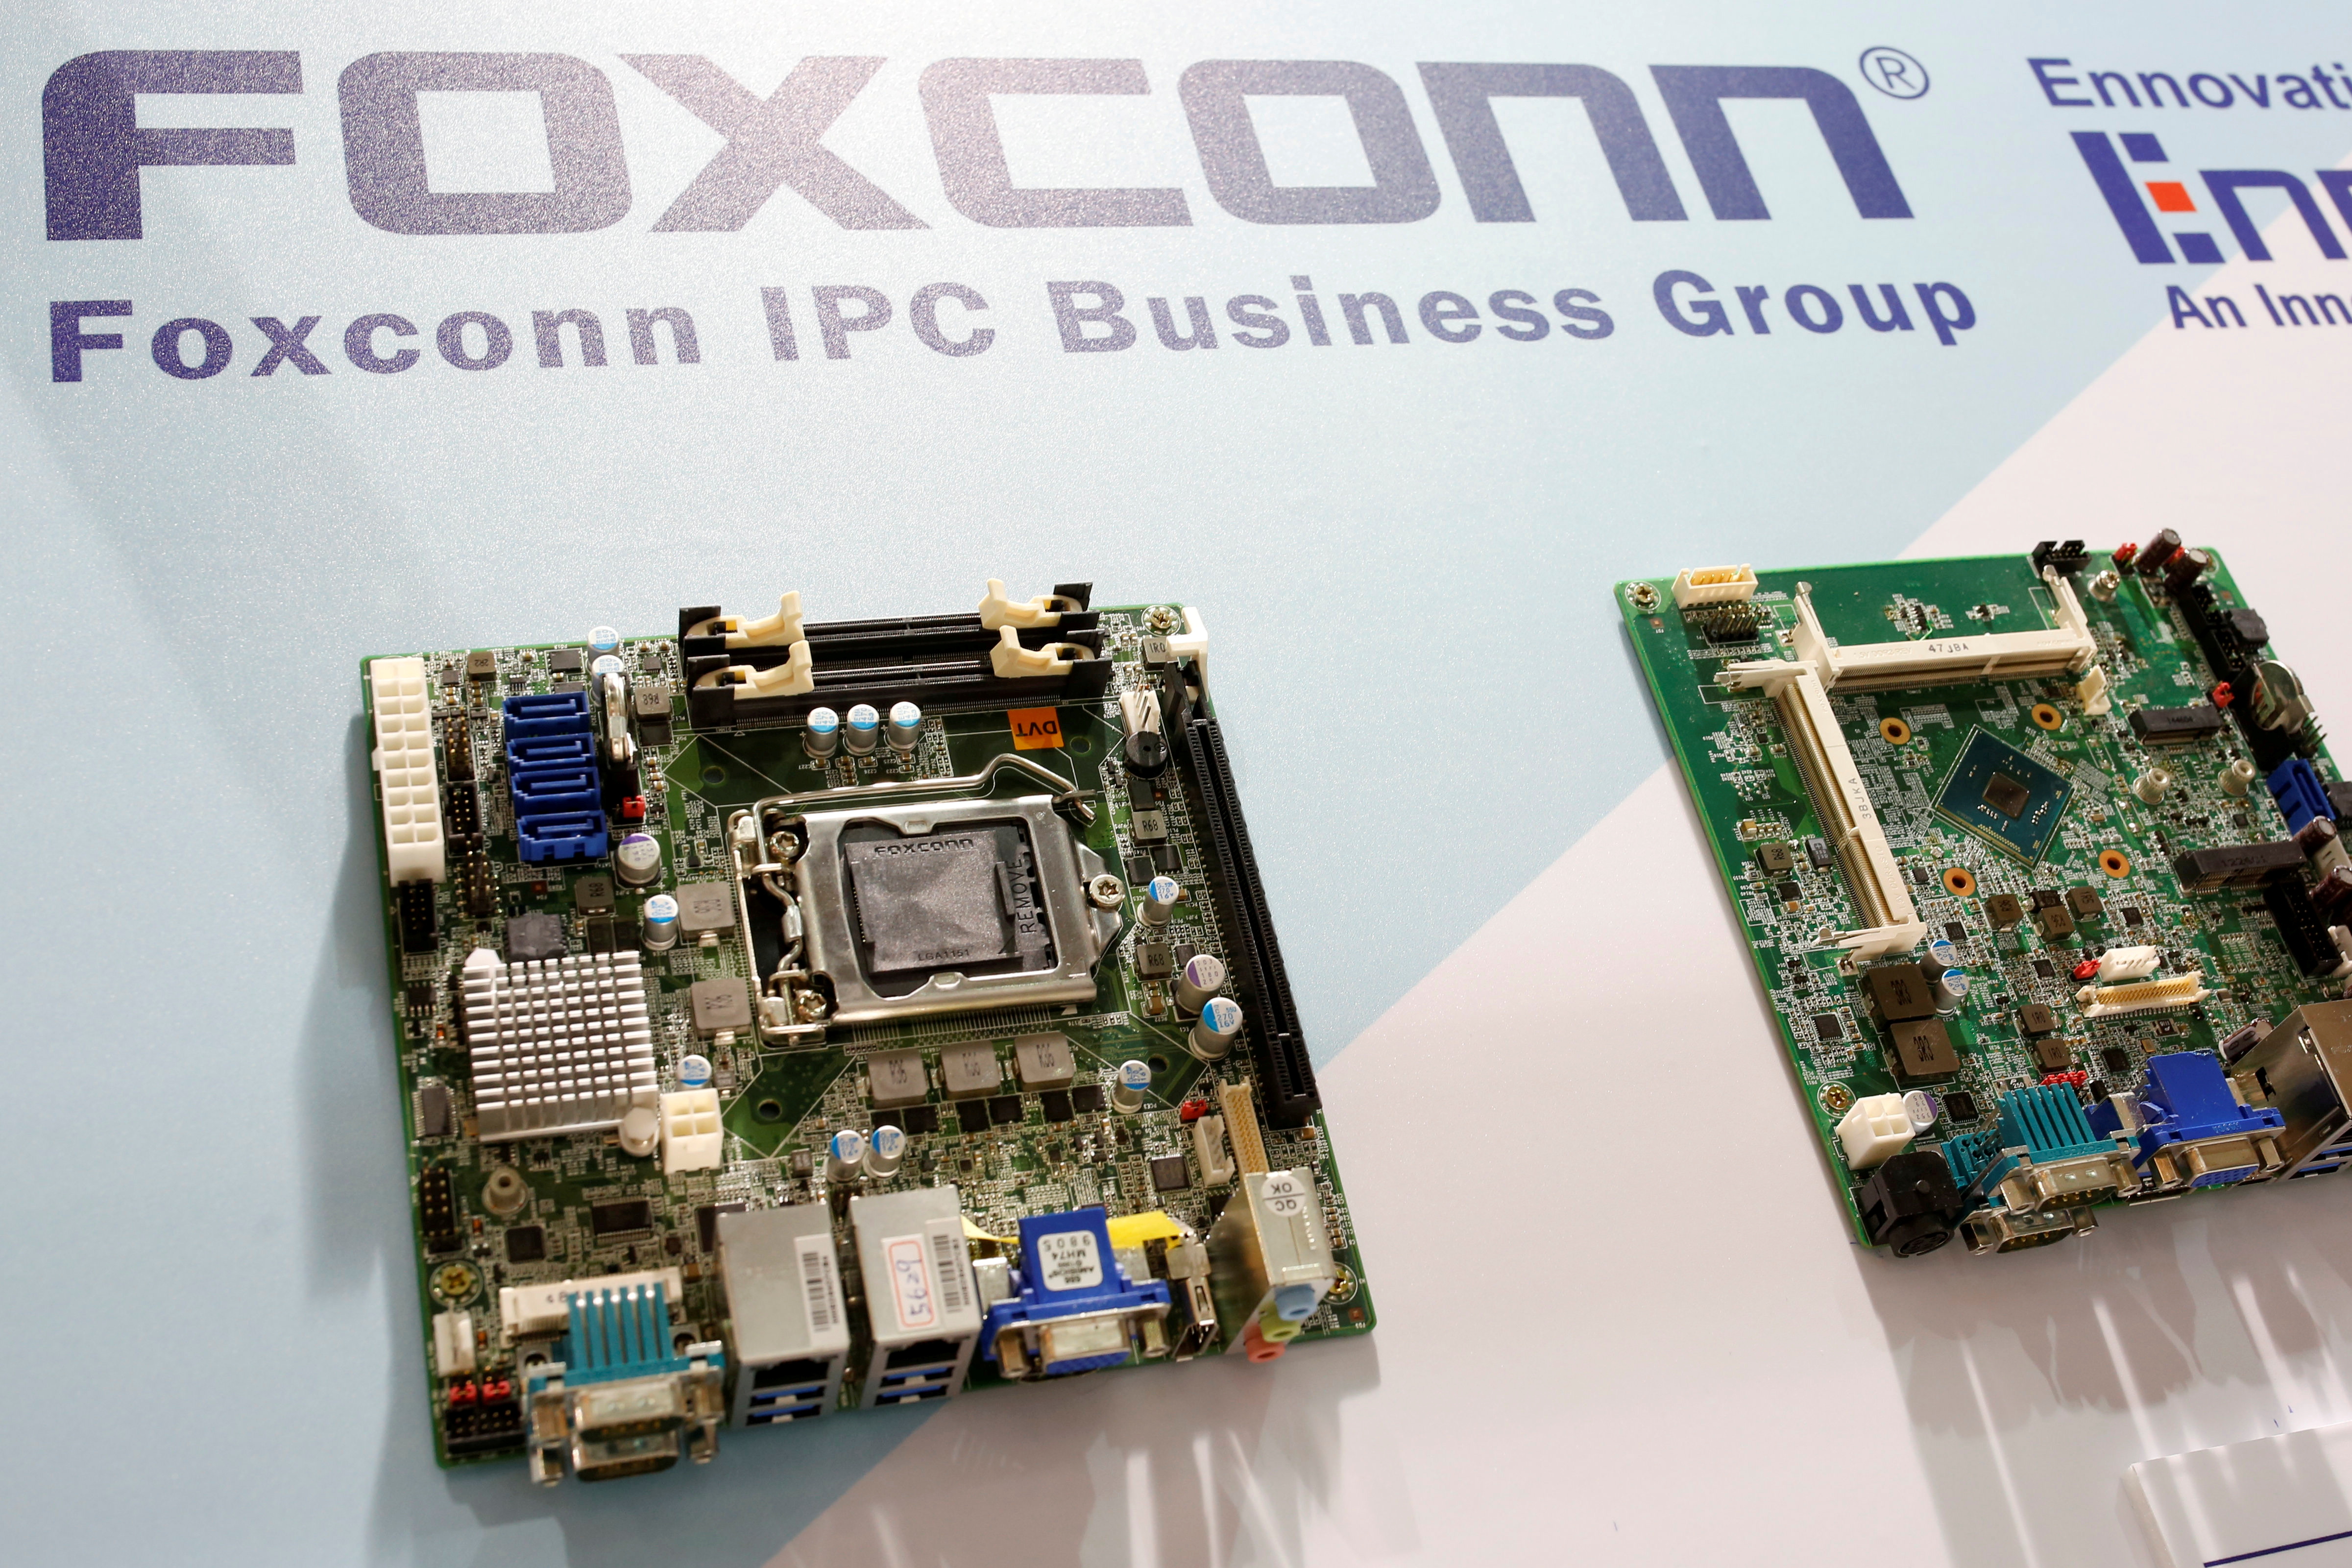 Foxconn's computer motherboards are seen during the annual Computex computer exhibition in Taipei